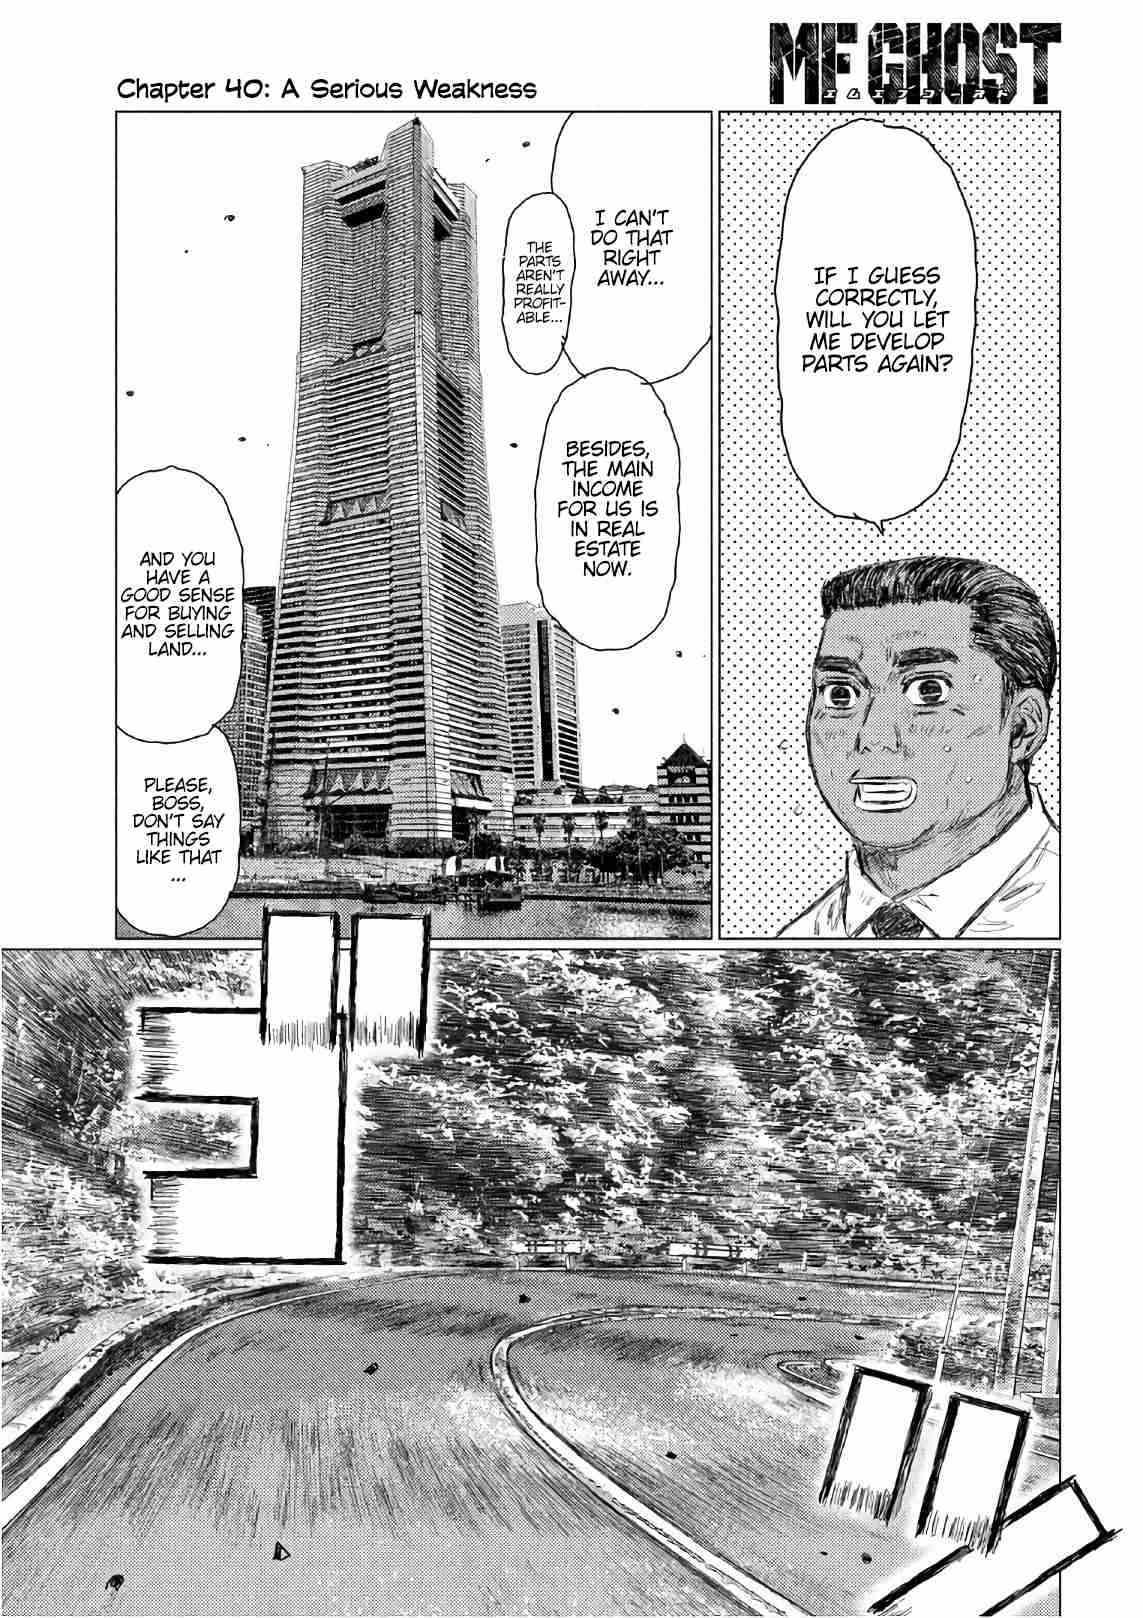 MF Ghost Vol. 4 Ch. 40 A Serious Weakness